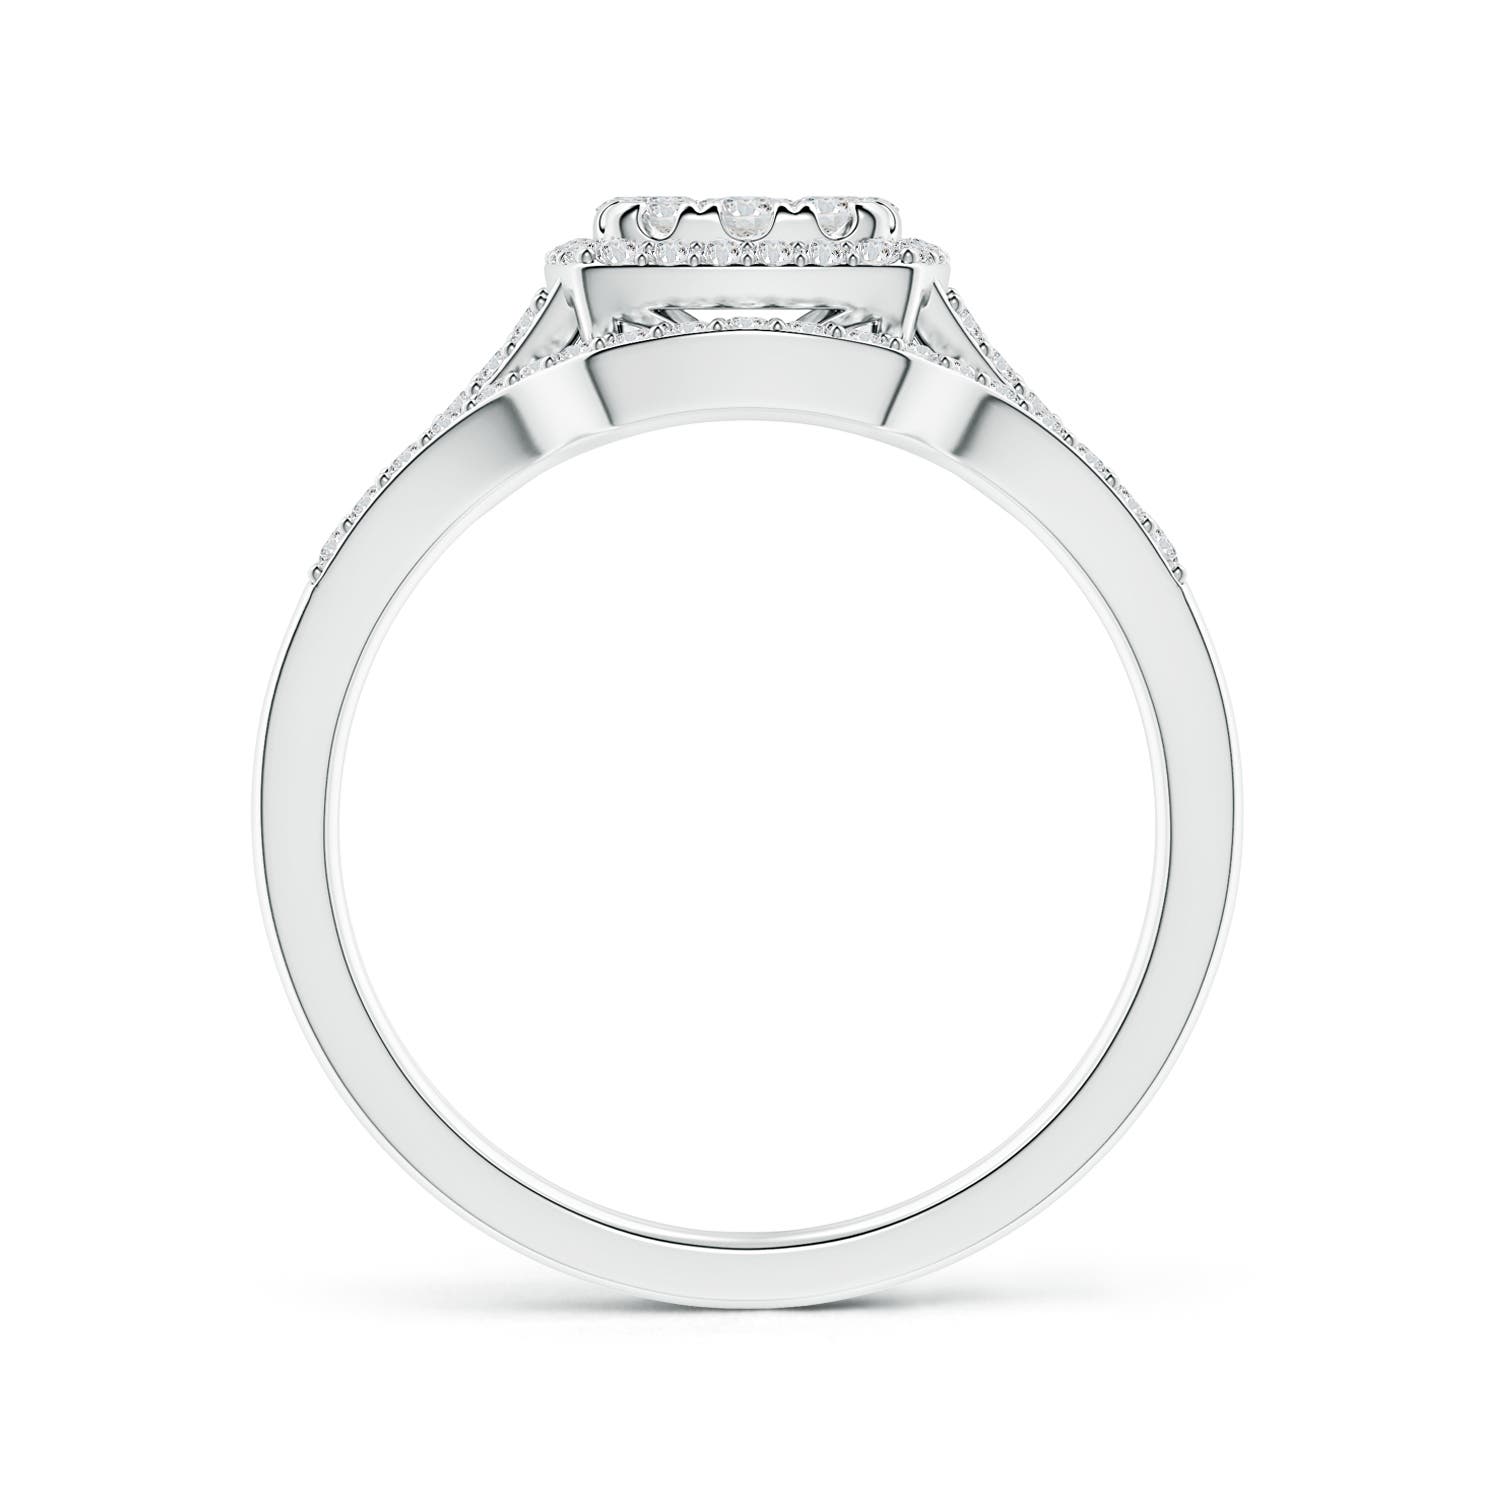 H, SI2 / 0.87 CT / 14 KT White Gold